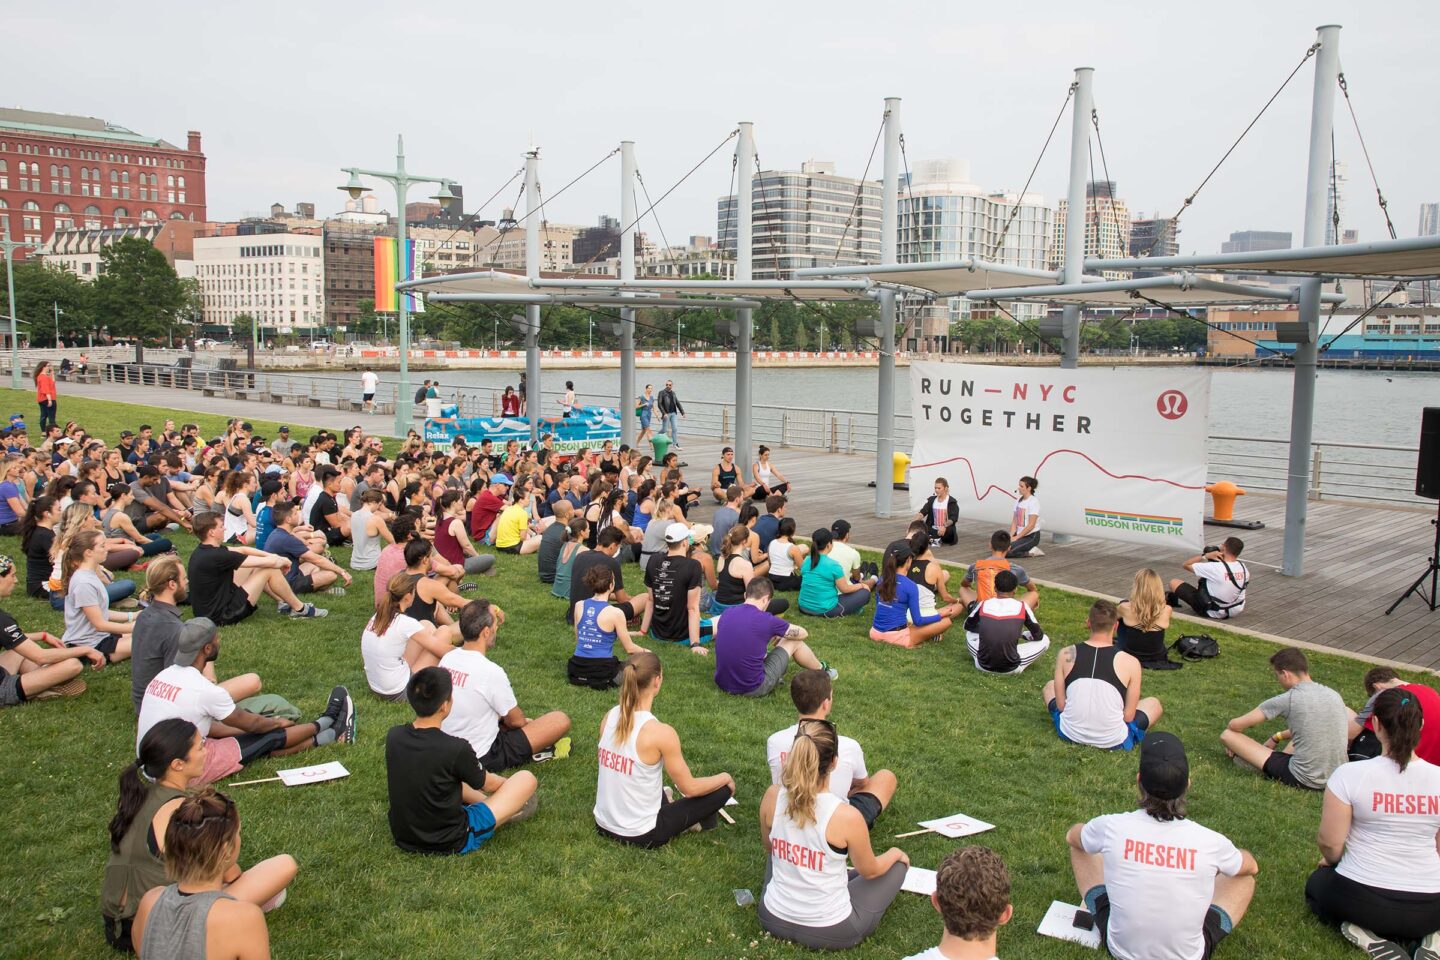 A group of participants for Run-NYC Together sit and stretch and discuss the upcoming race